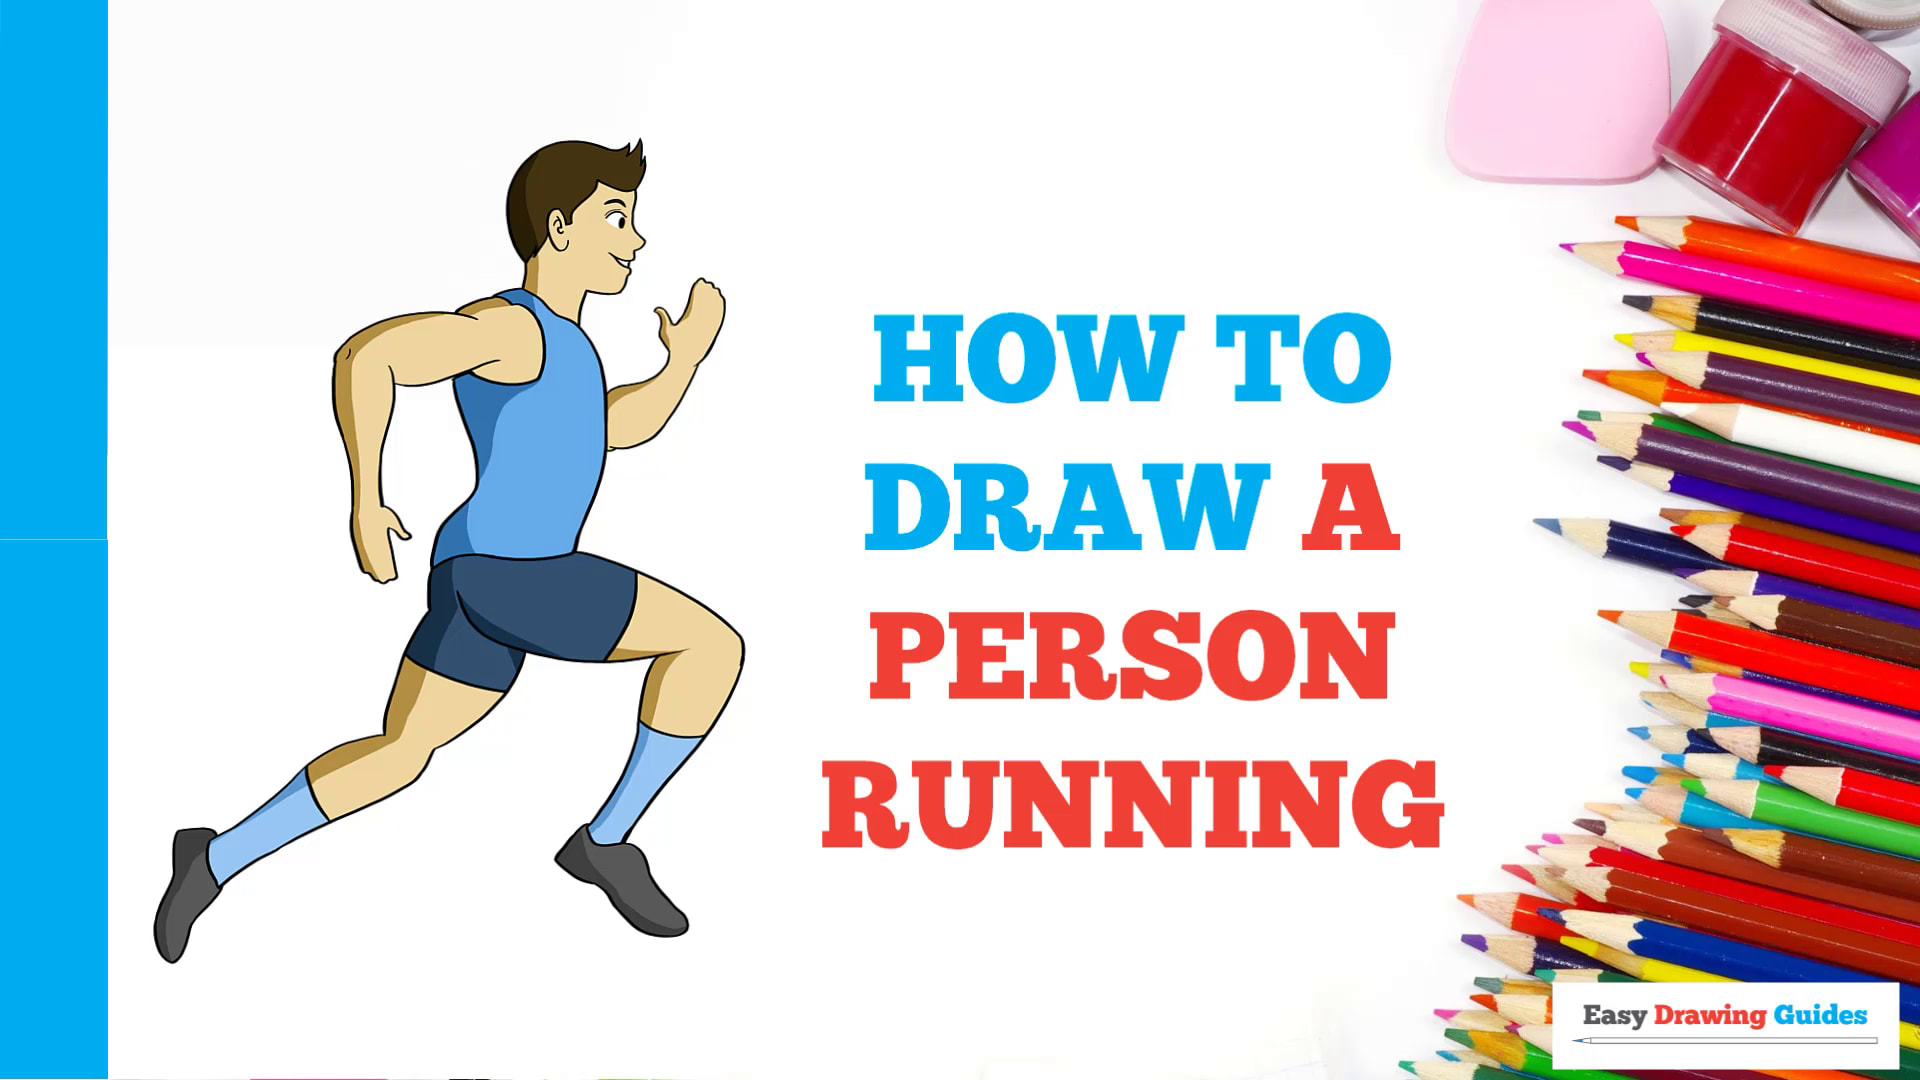 How to Draw a Person Running - Really Easy Drawing Tutorial